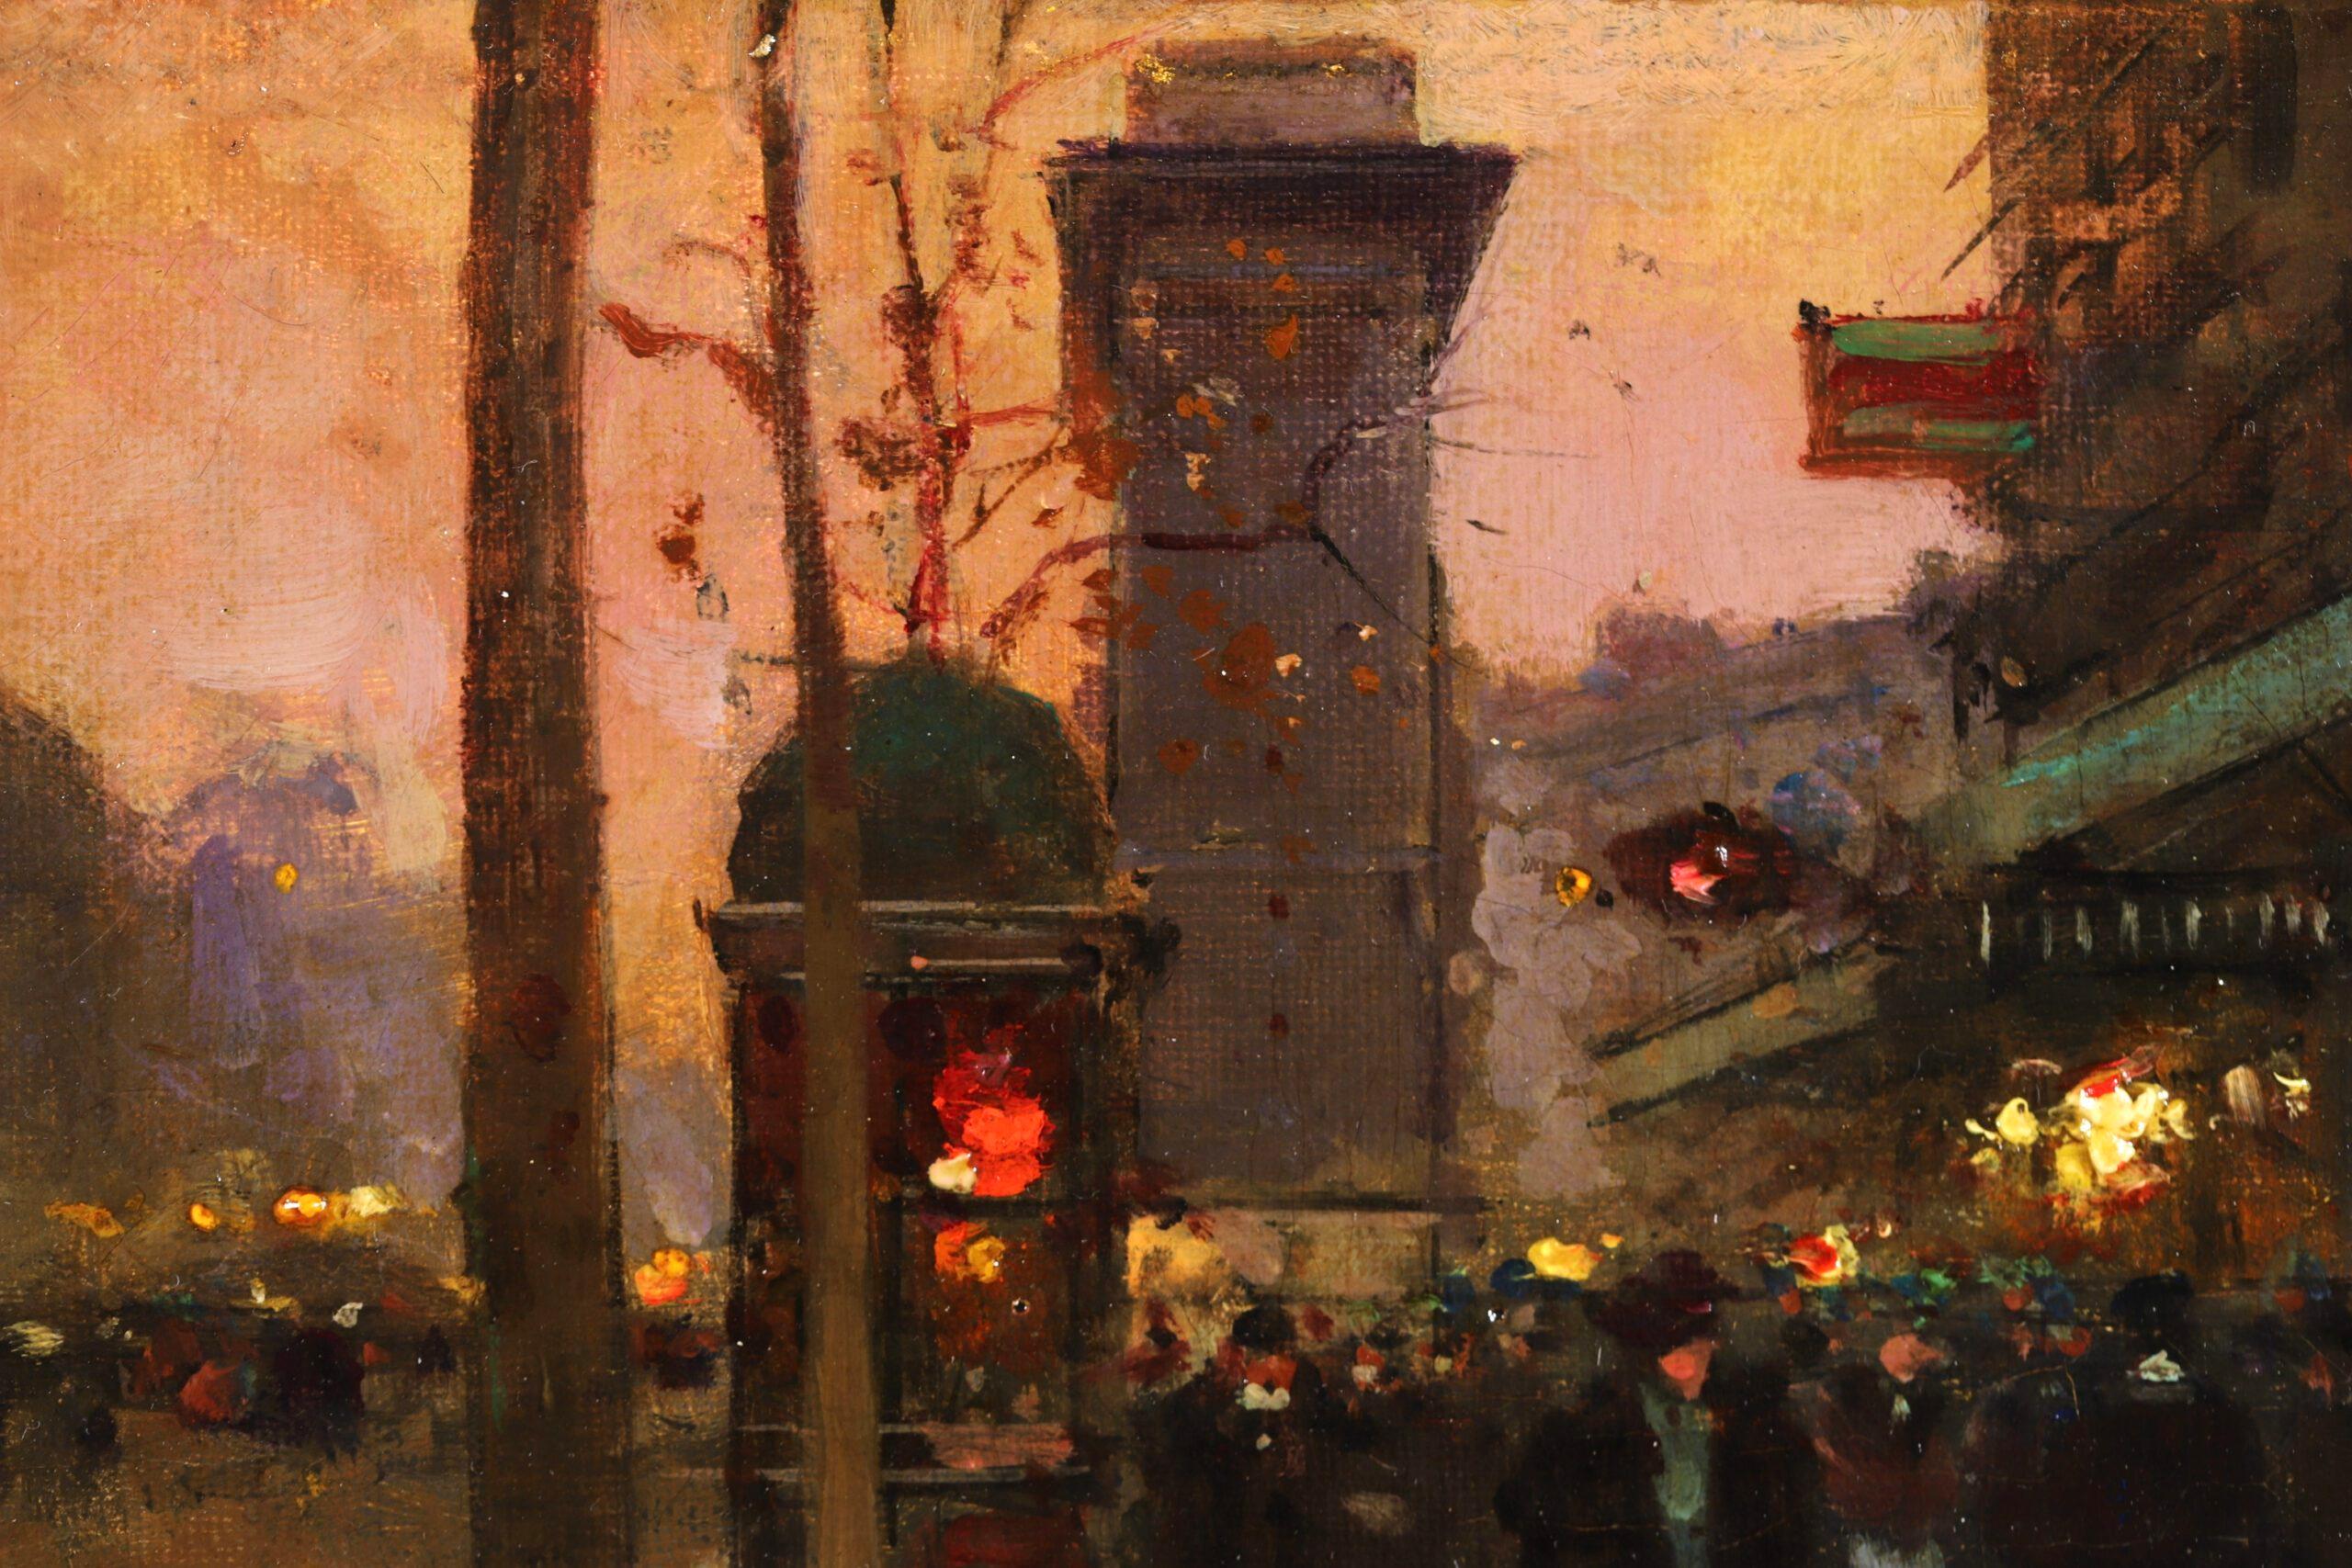 Signed impressionist oil on canvas figures in landscape circa 1915 by sought after French painter Edouard Cortes. The work depicts a bustling evening street scene in Paris, France. In the distance the Porte Saint Denis can be seen. Porte Saint-Denis